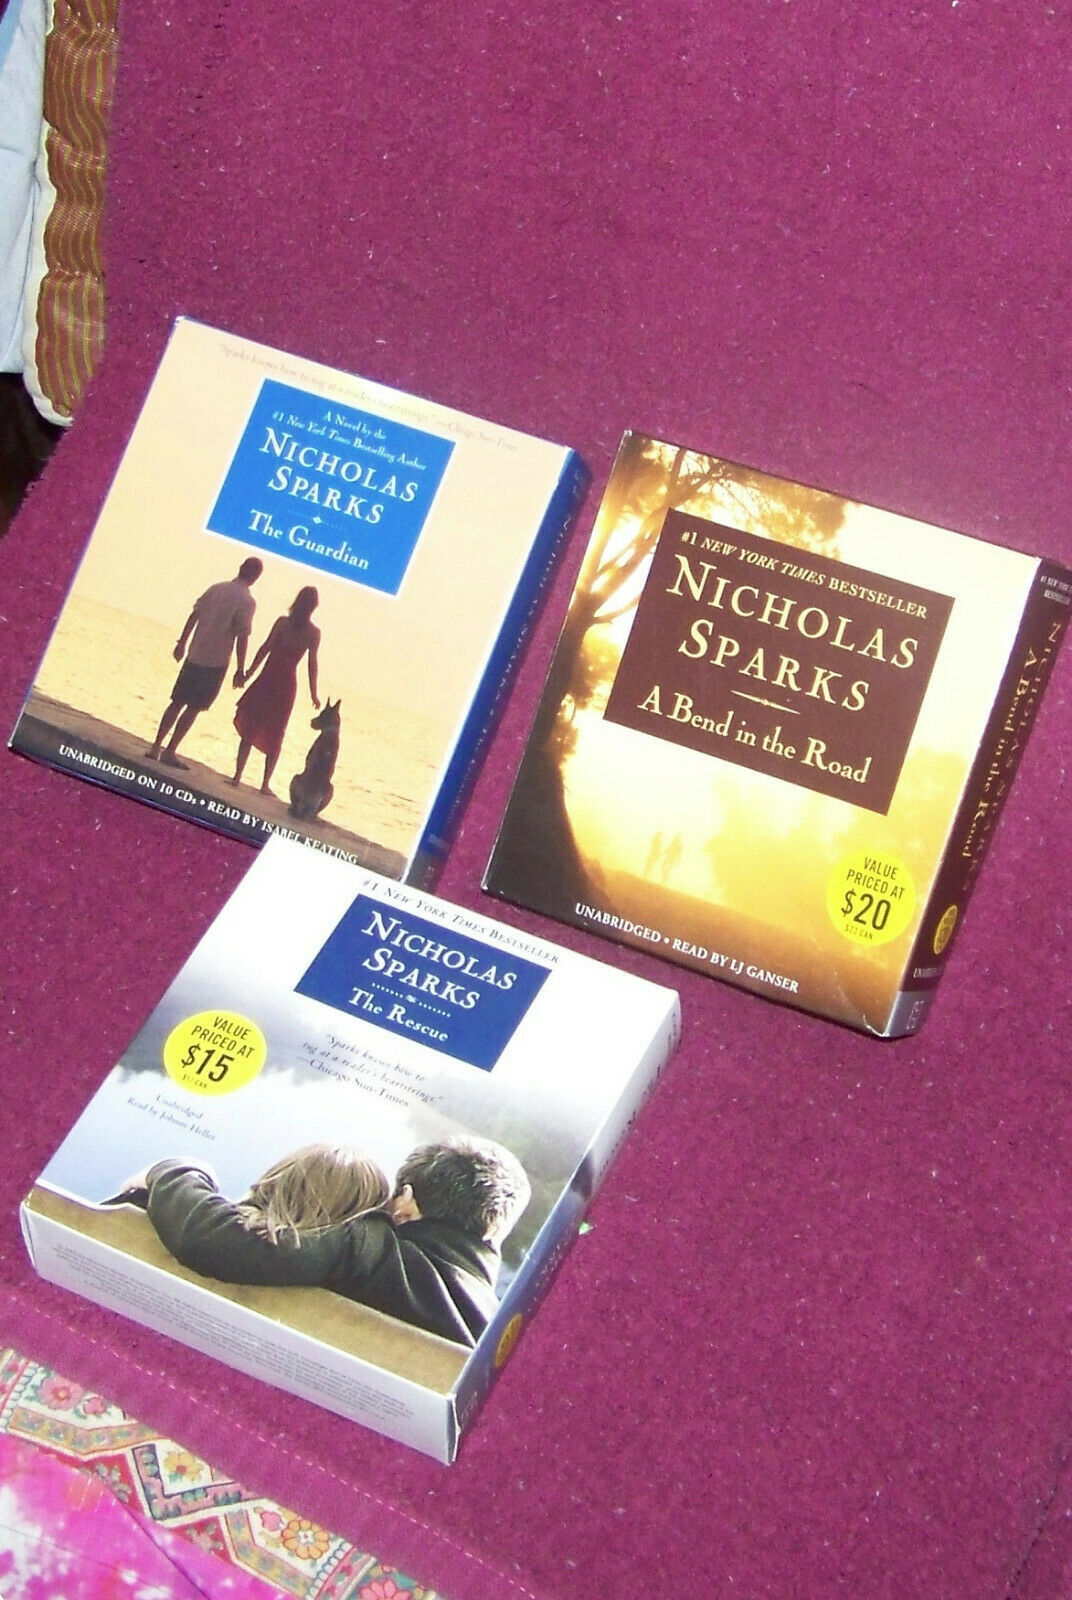 Primary image for audio books    by {nicholas sparks}